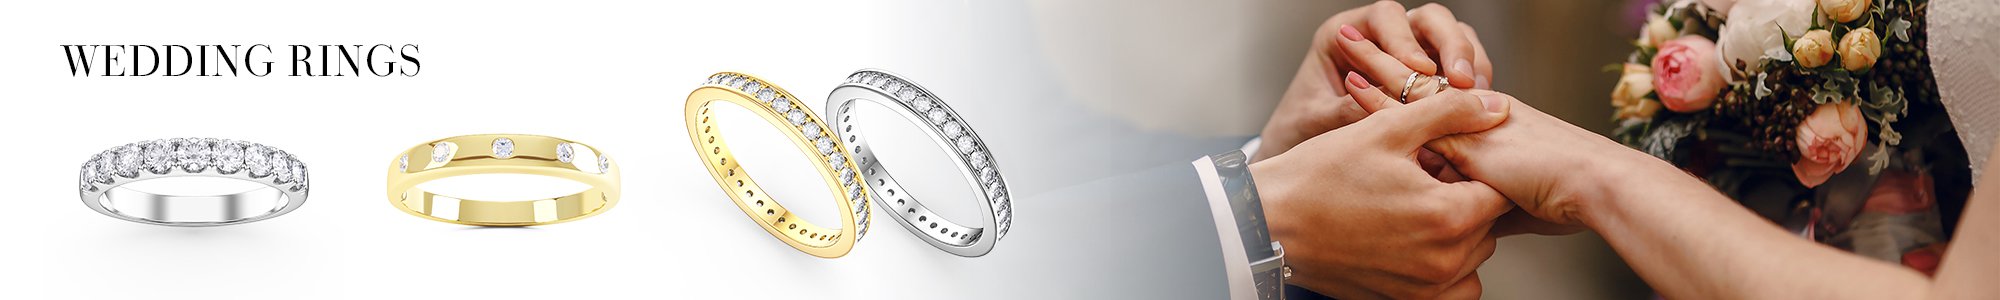 Wedding Rings - From White Sapphire set in Silver to Diamonds set in 18K Gold or Platinum.